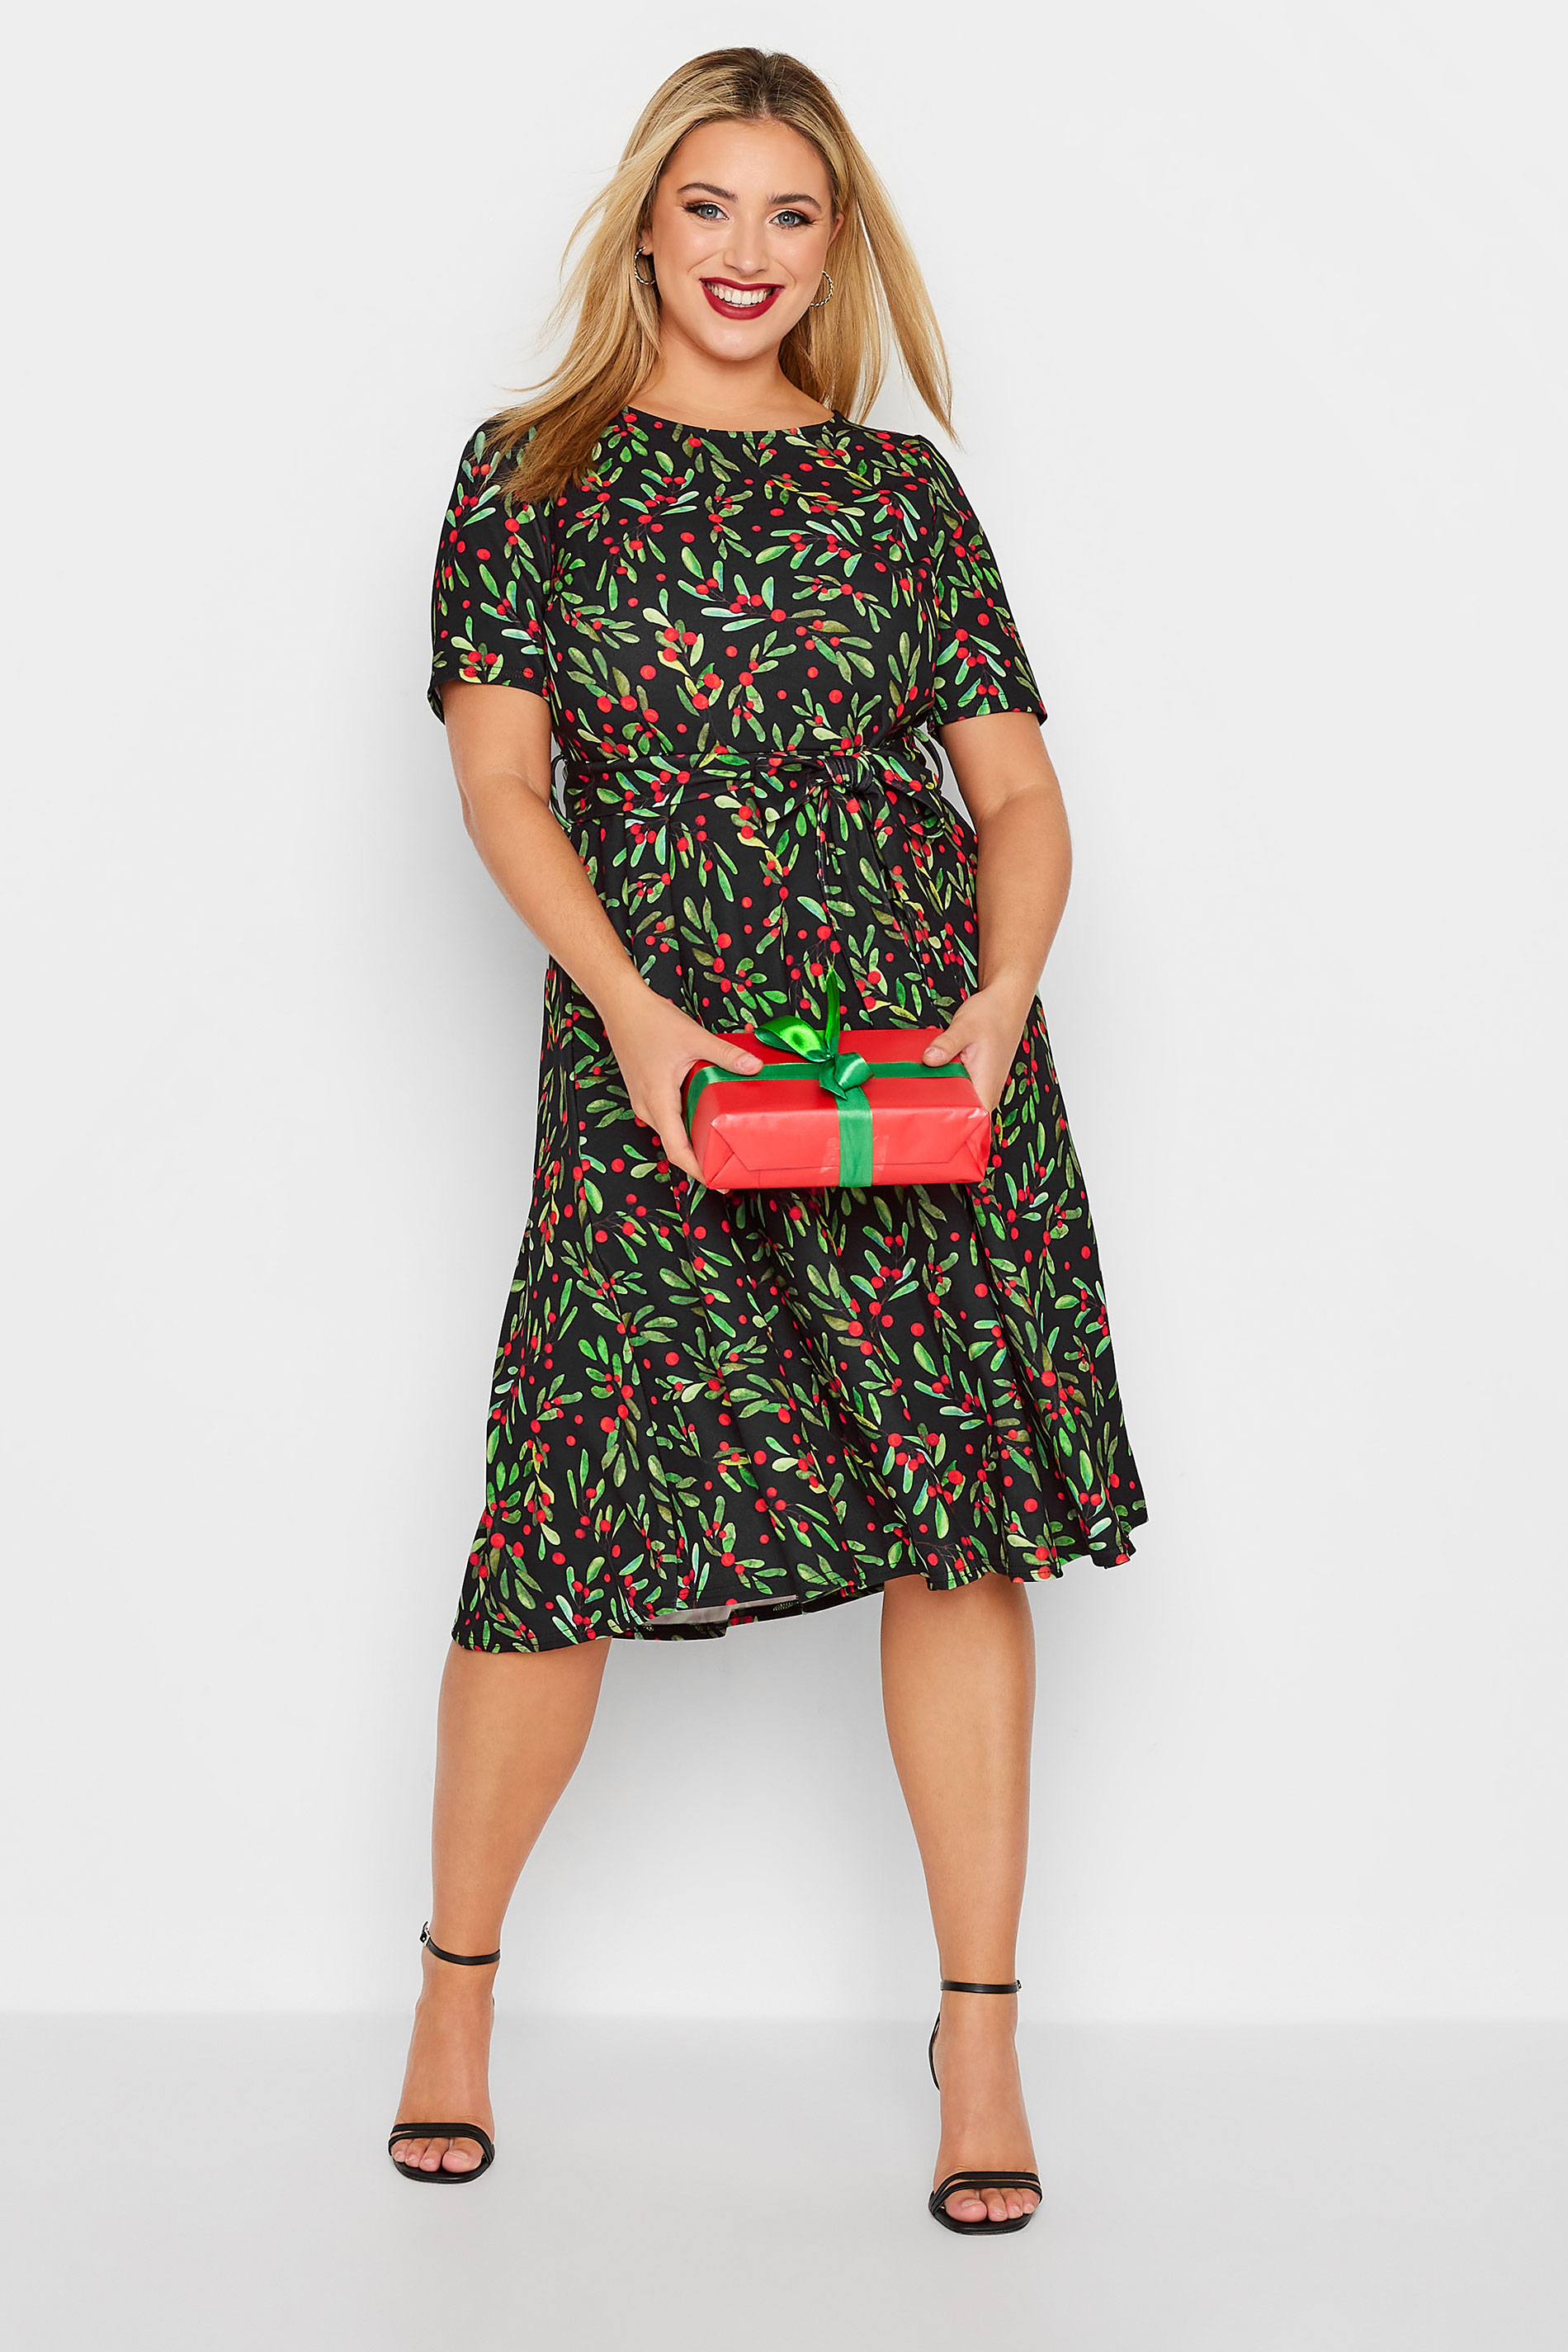 YOURS LONDON Plus Size Black Winter Berry Christmas Skater Dress | Yours Clothing 1